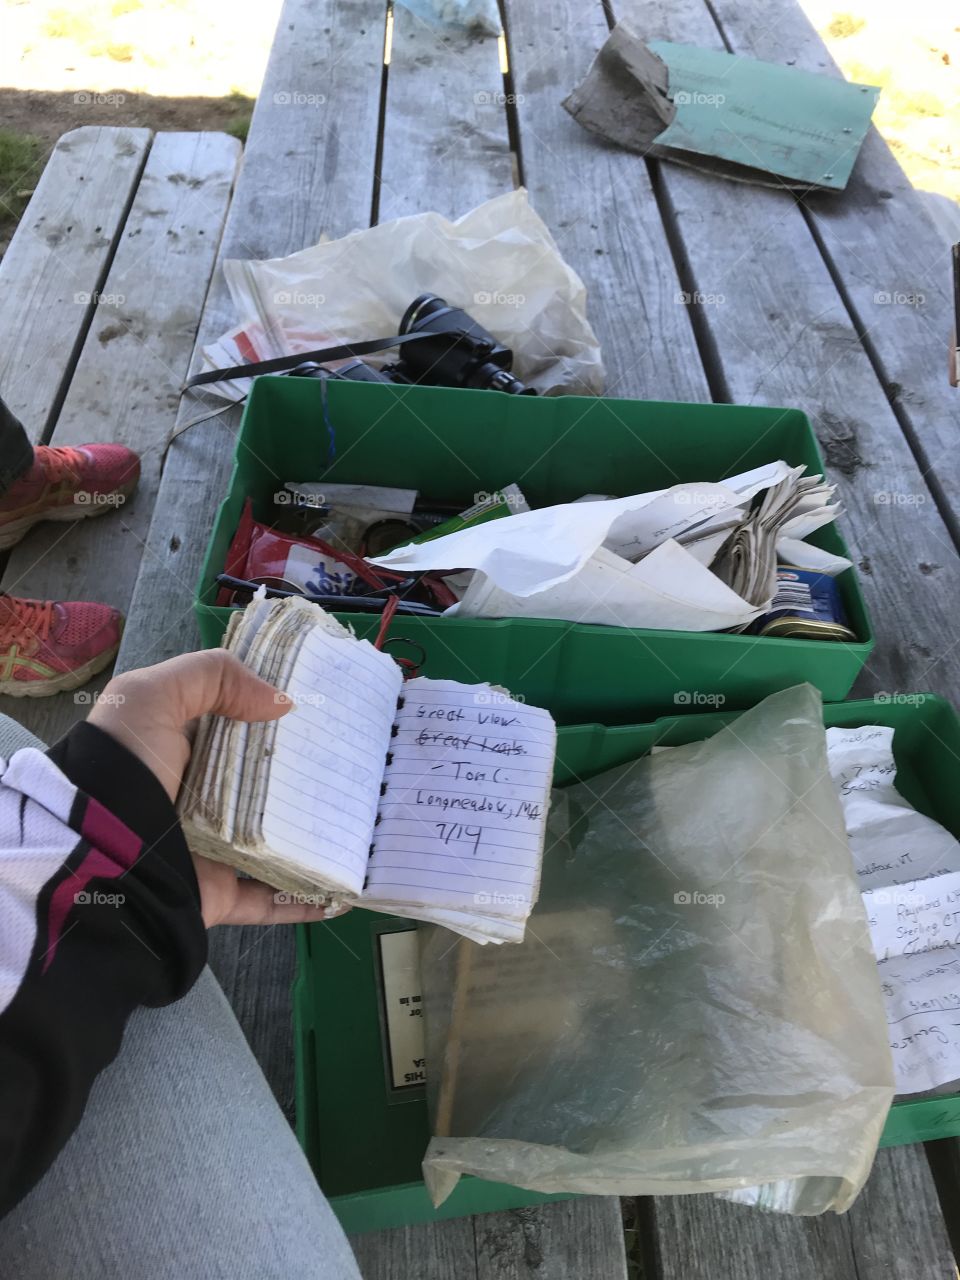 Found a box full “guest books” with people signing in who make it up the Rocky Mountain. Binoculars and other things were also found in it. 